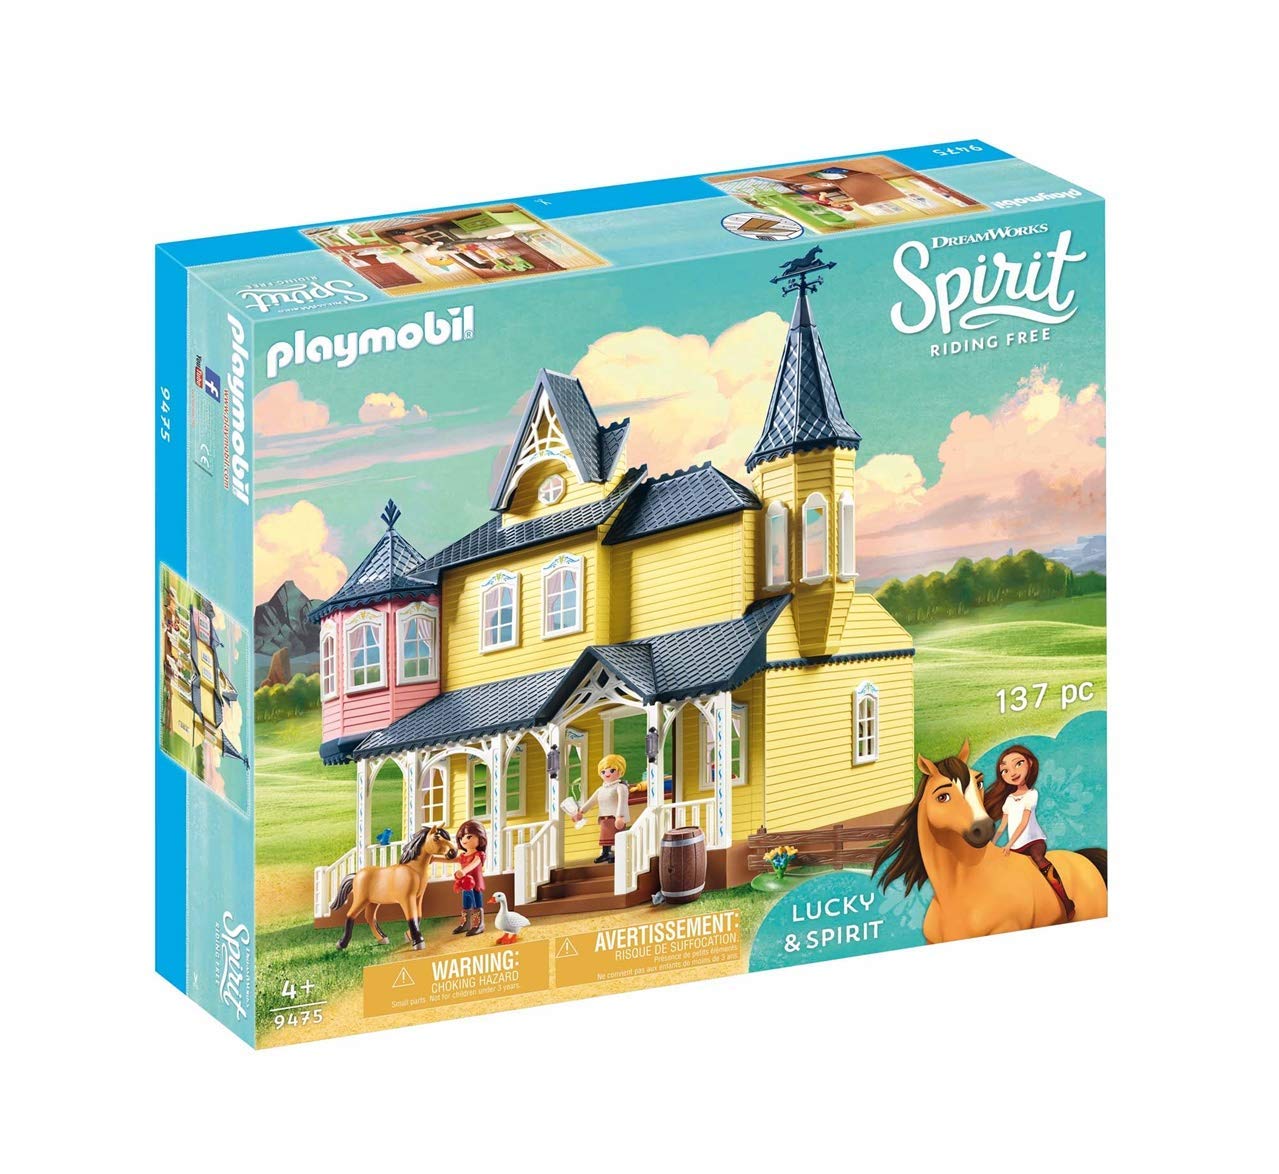 Playmobil-9475 Spirit House By Lucky Multicolor (9475)